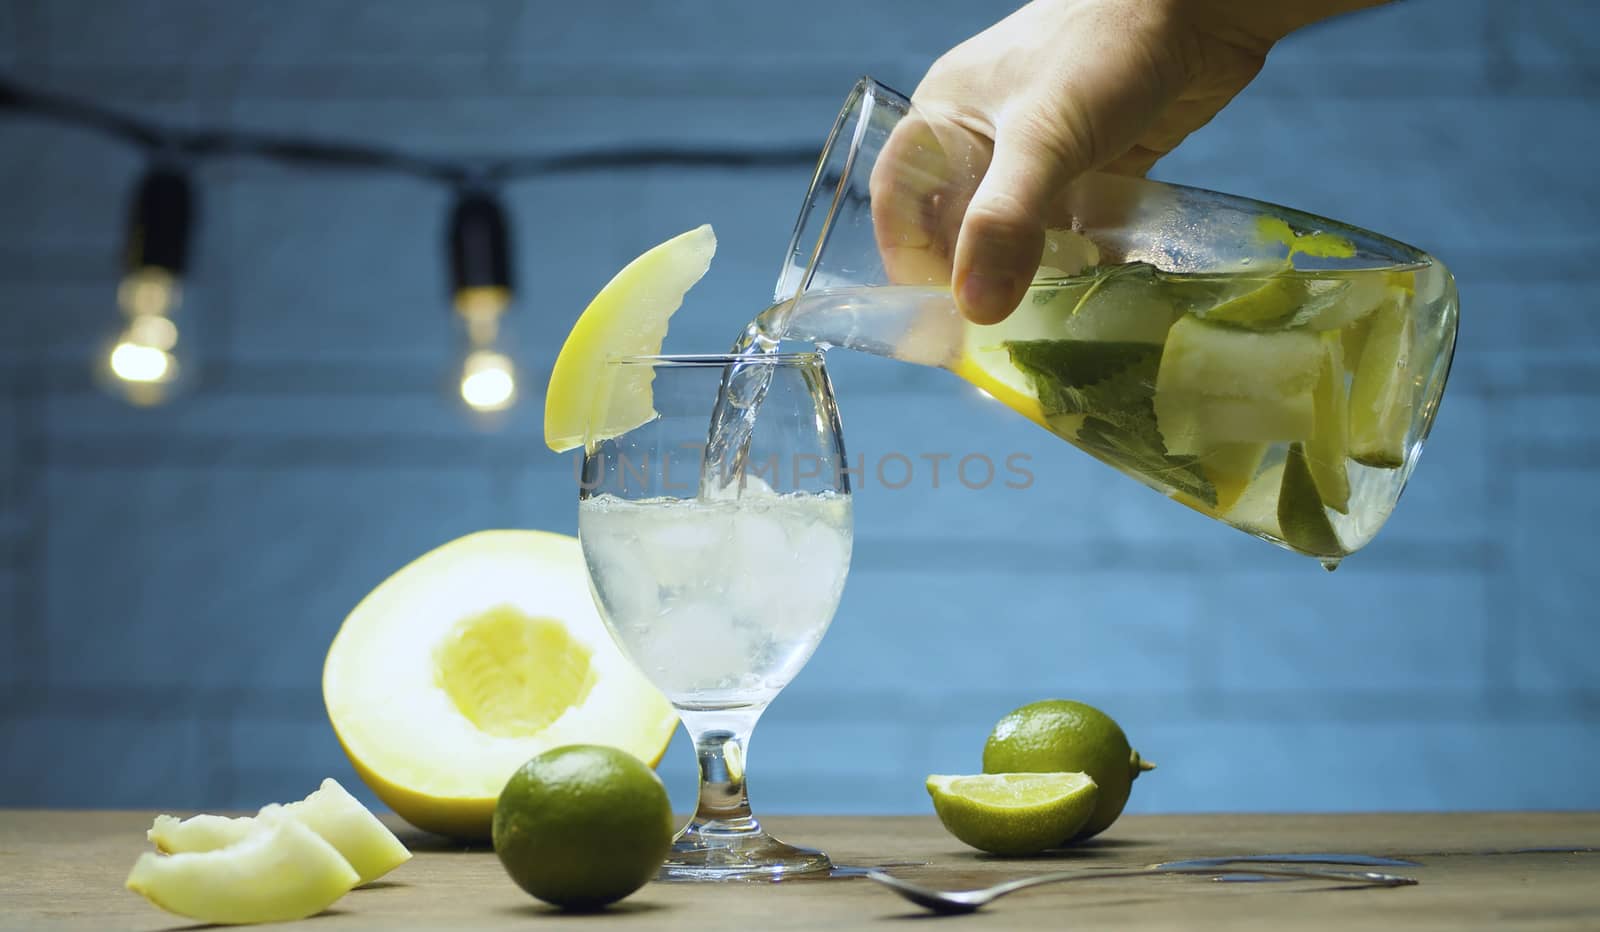 Close up male hand pouring melon lemonade into a glass from a jug with pieces of melon, lime wedges, mint leaves and ice. Blurry lamps on blue background